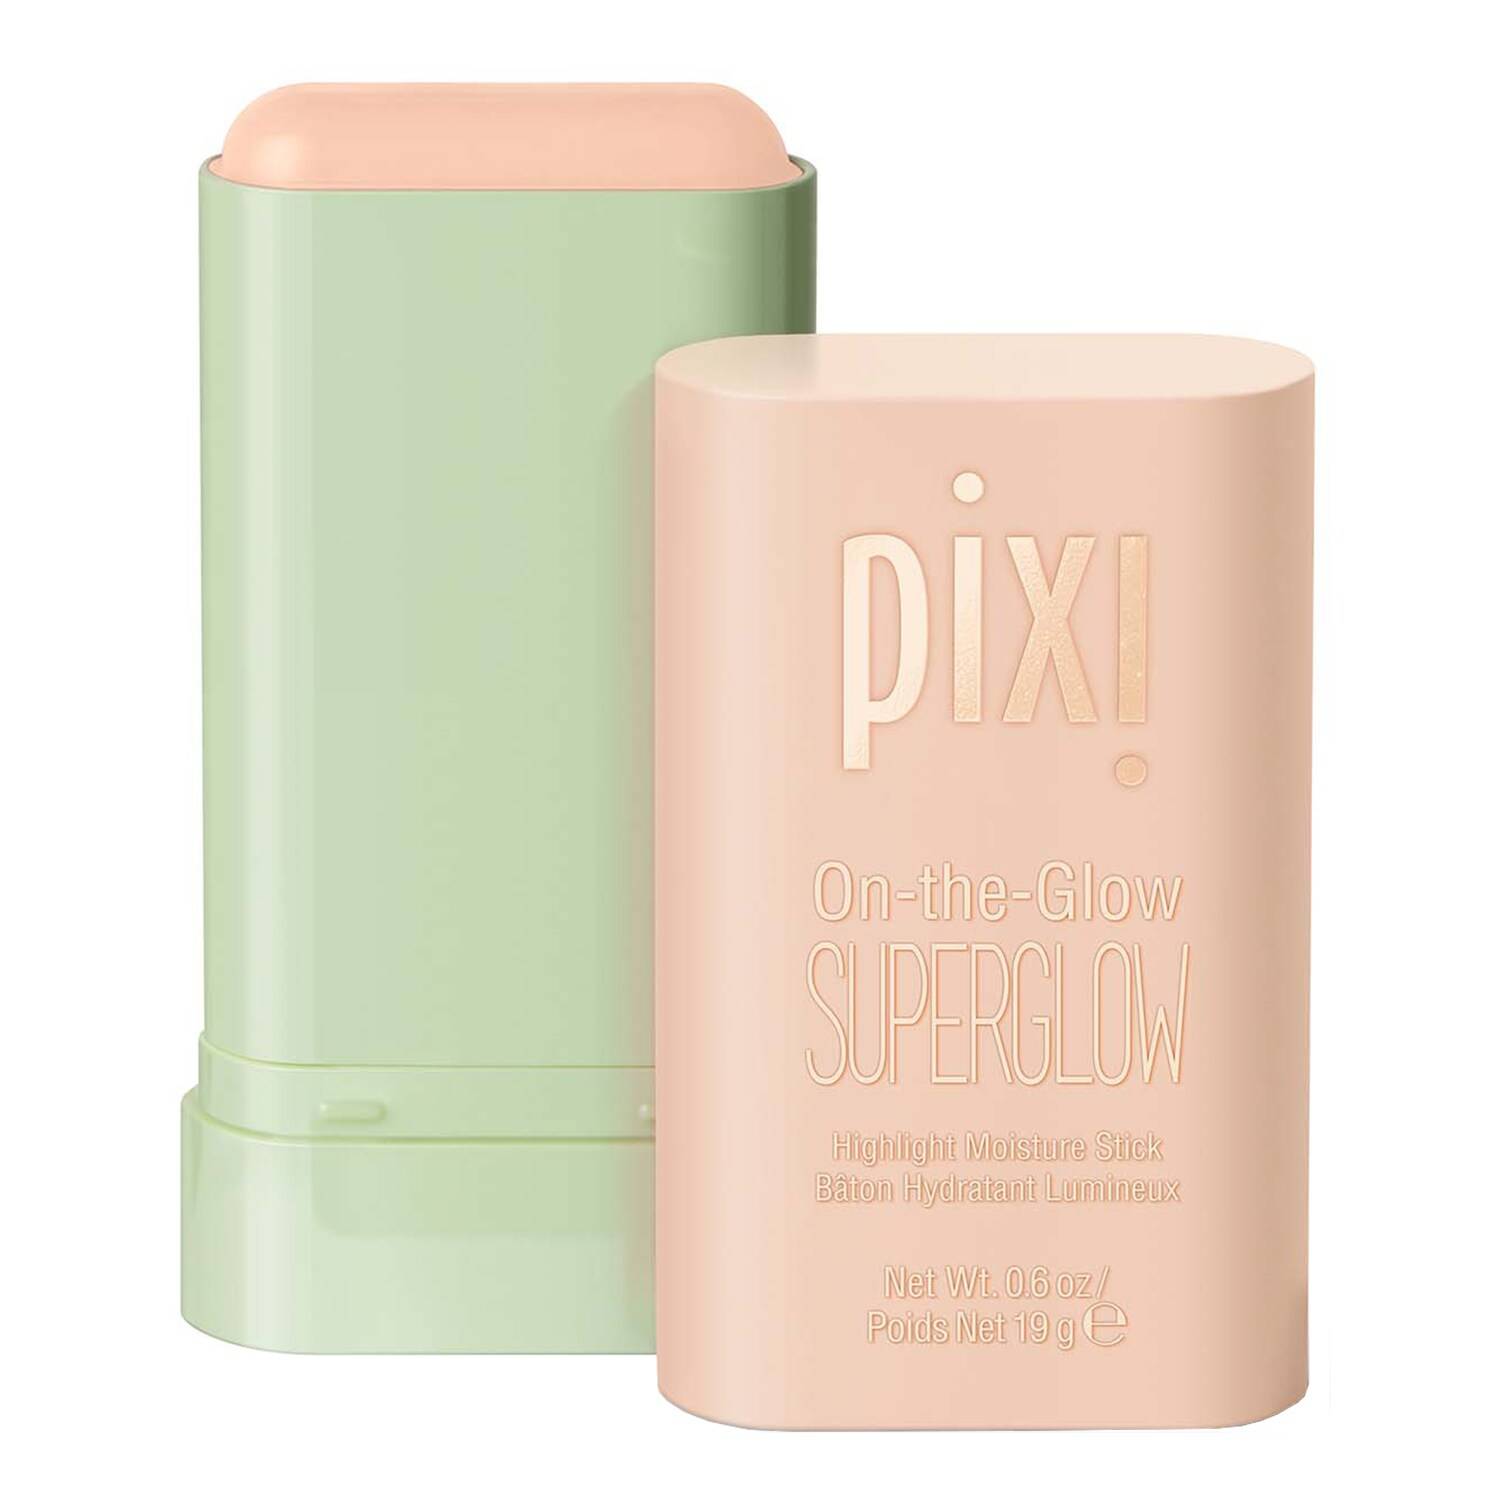 Pixi On-The-Glow Superglow 19G Natural Lustre